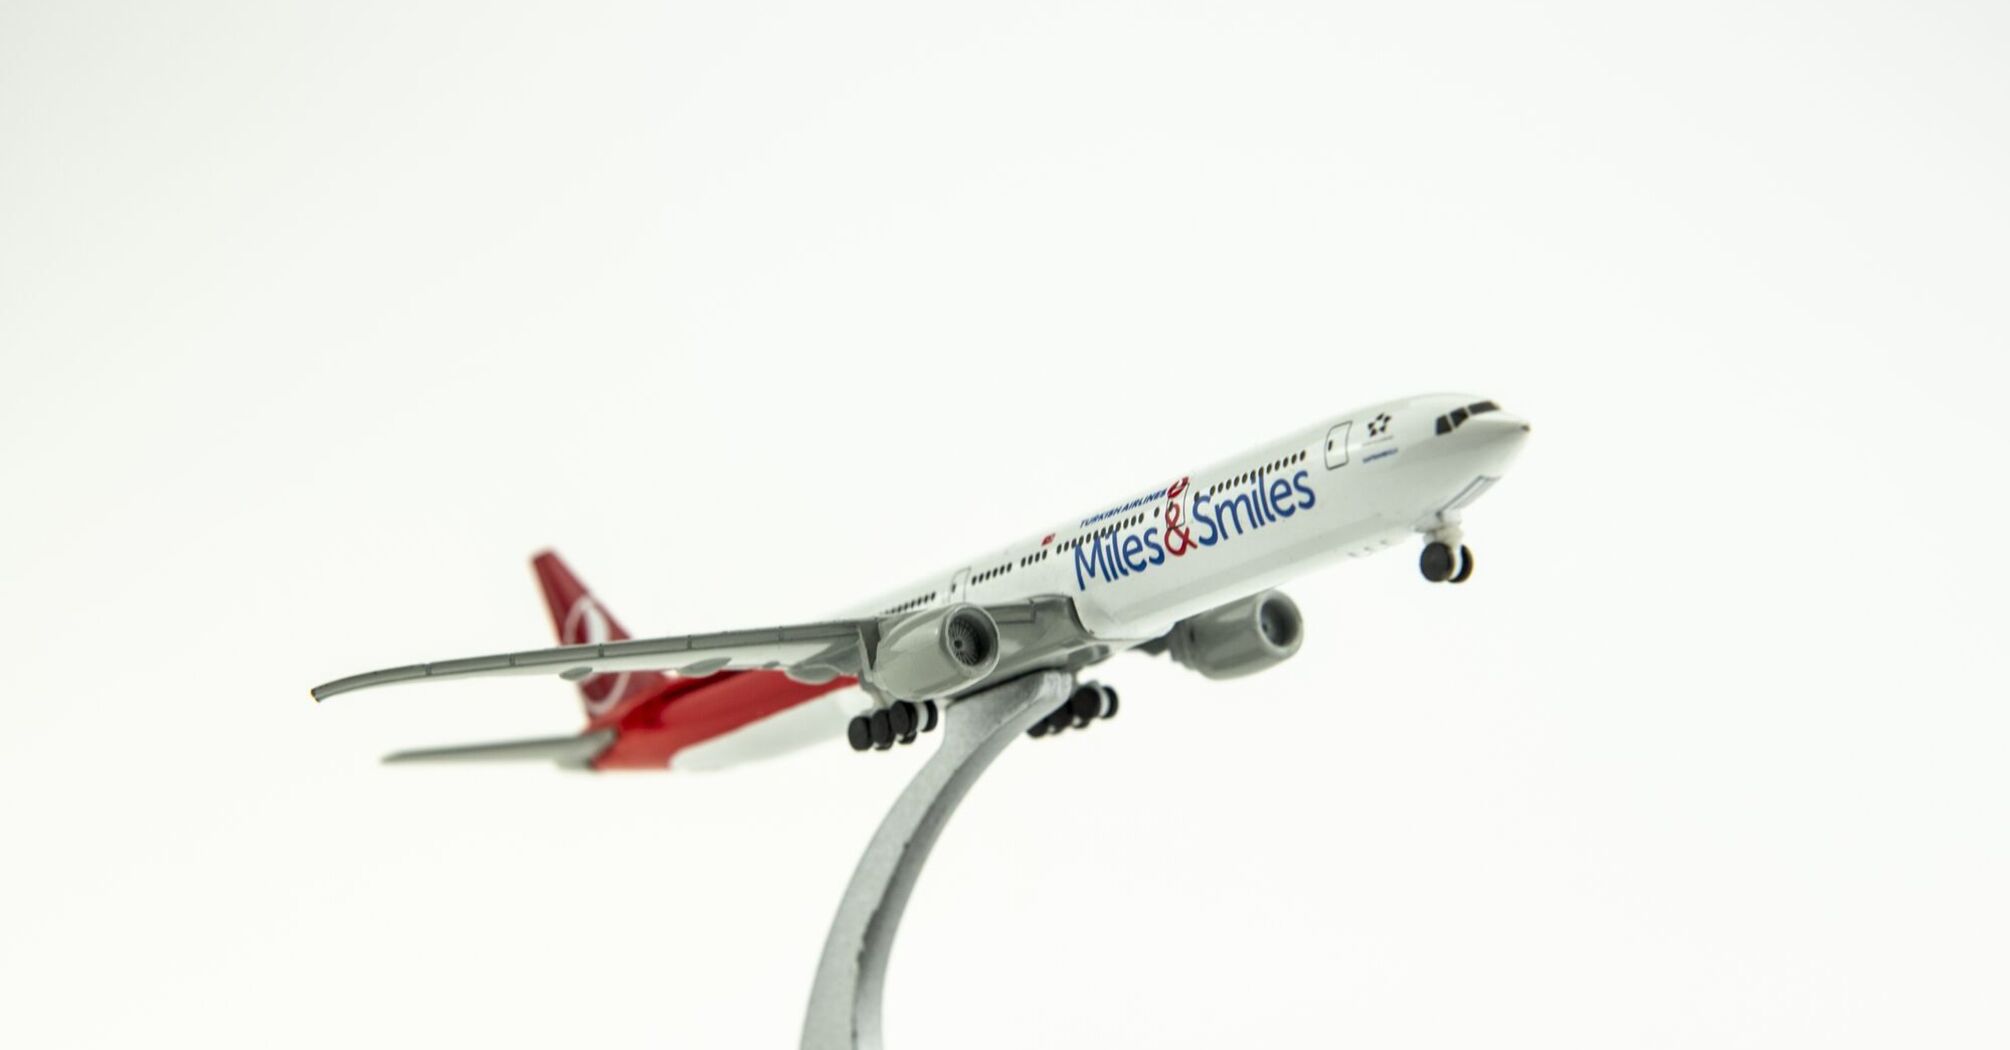 Turkish Airlines airplane model with 'Miles&Smiles' lettering taking off against a white studio background